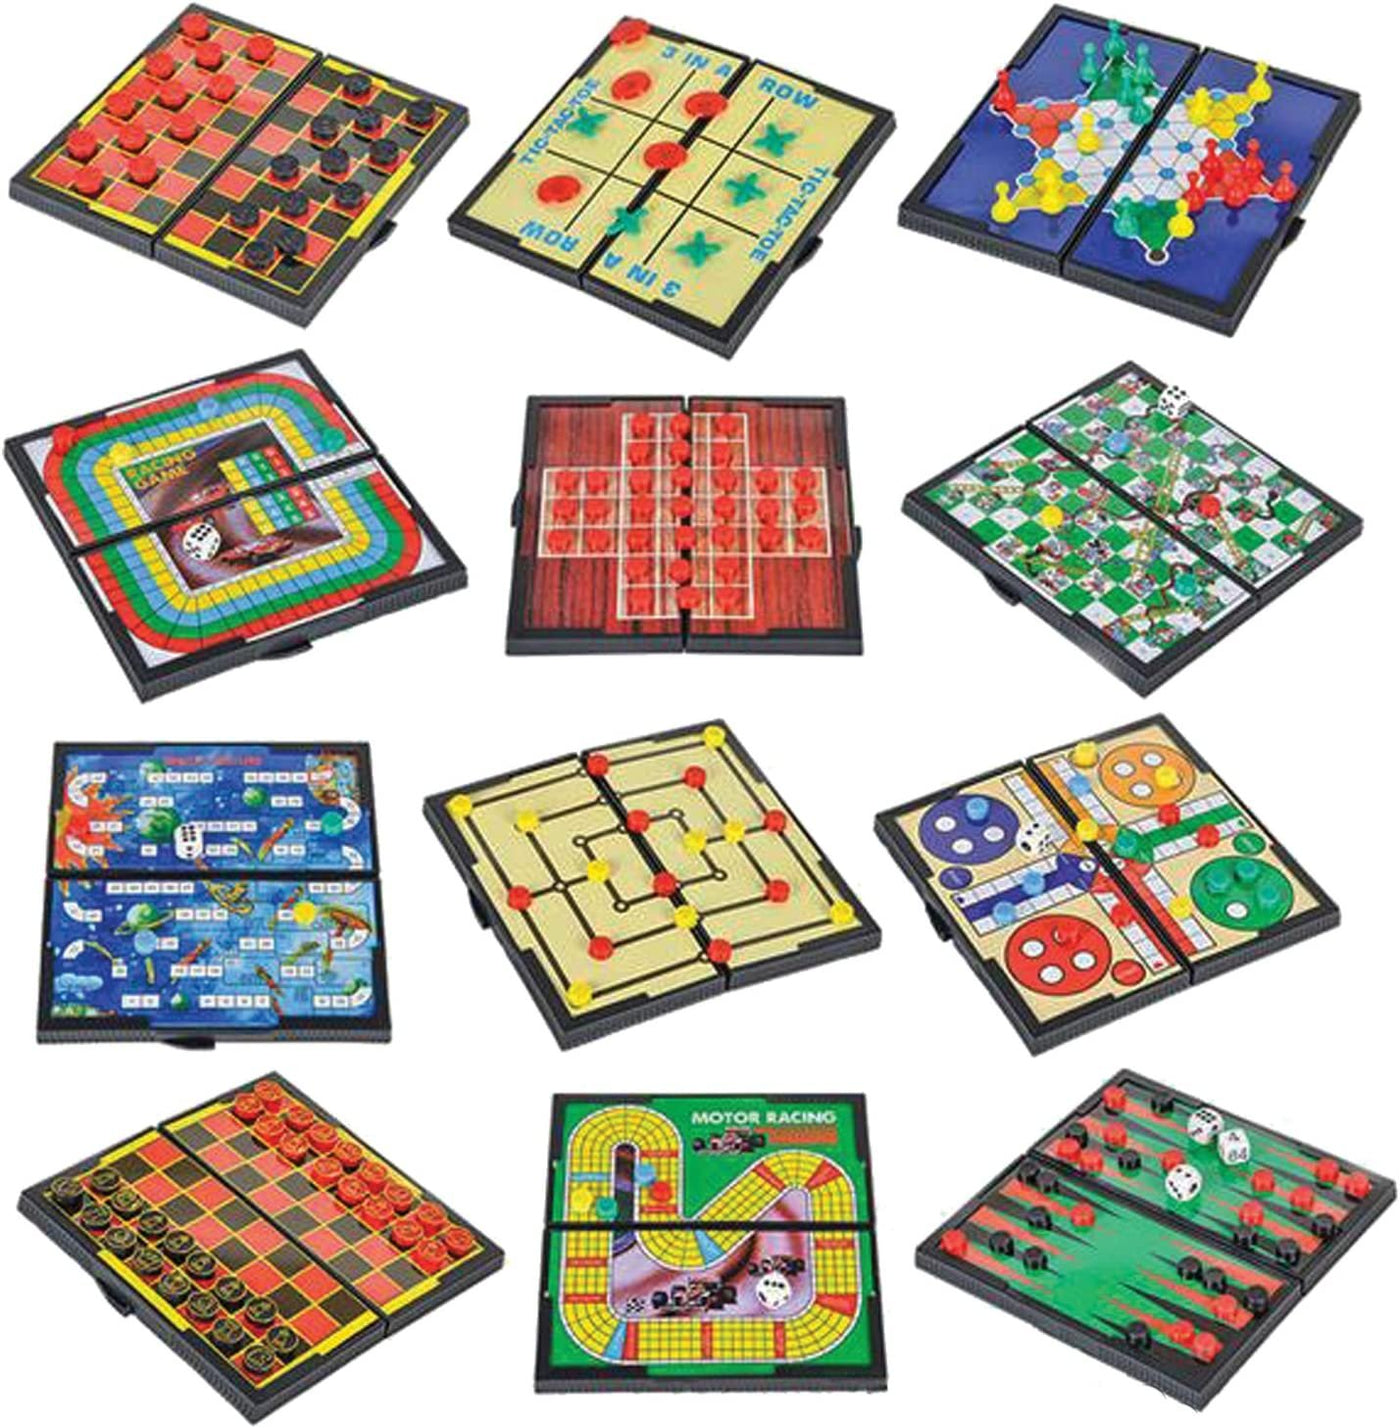 12 Magnetic Board Travel Game Set - 5" Road Trip & Camping Fun Games for Kids